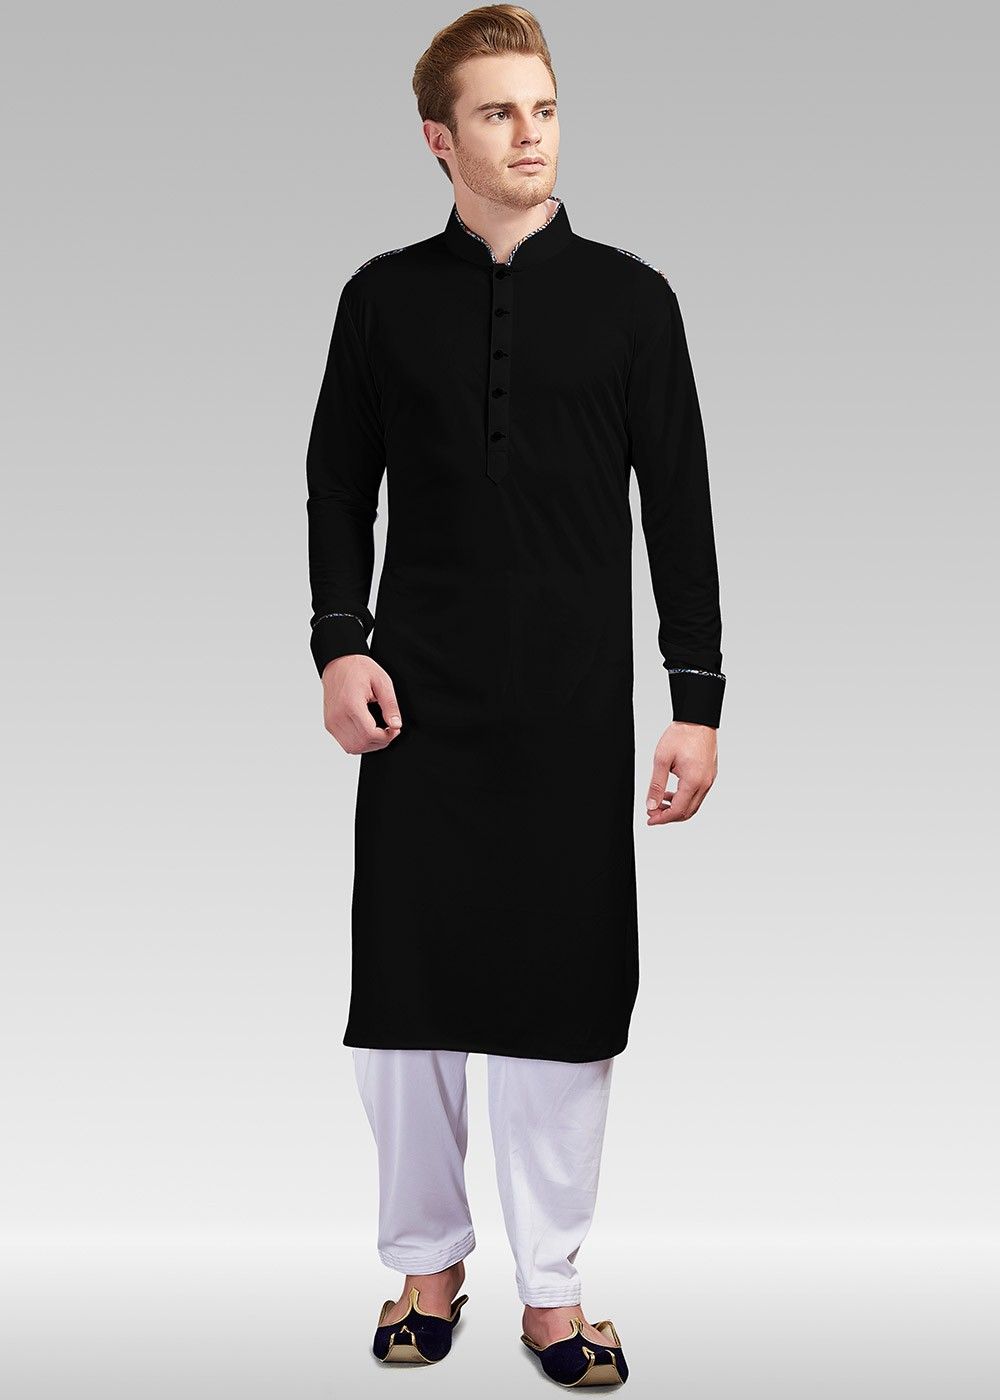 Black Pathani Suit for Mens Wedding at Best Prices UK Canada